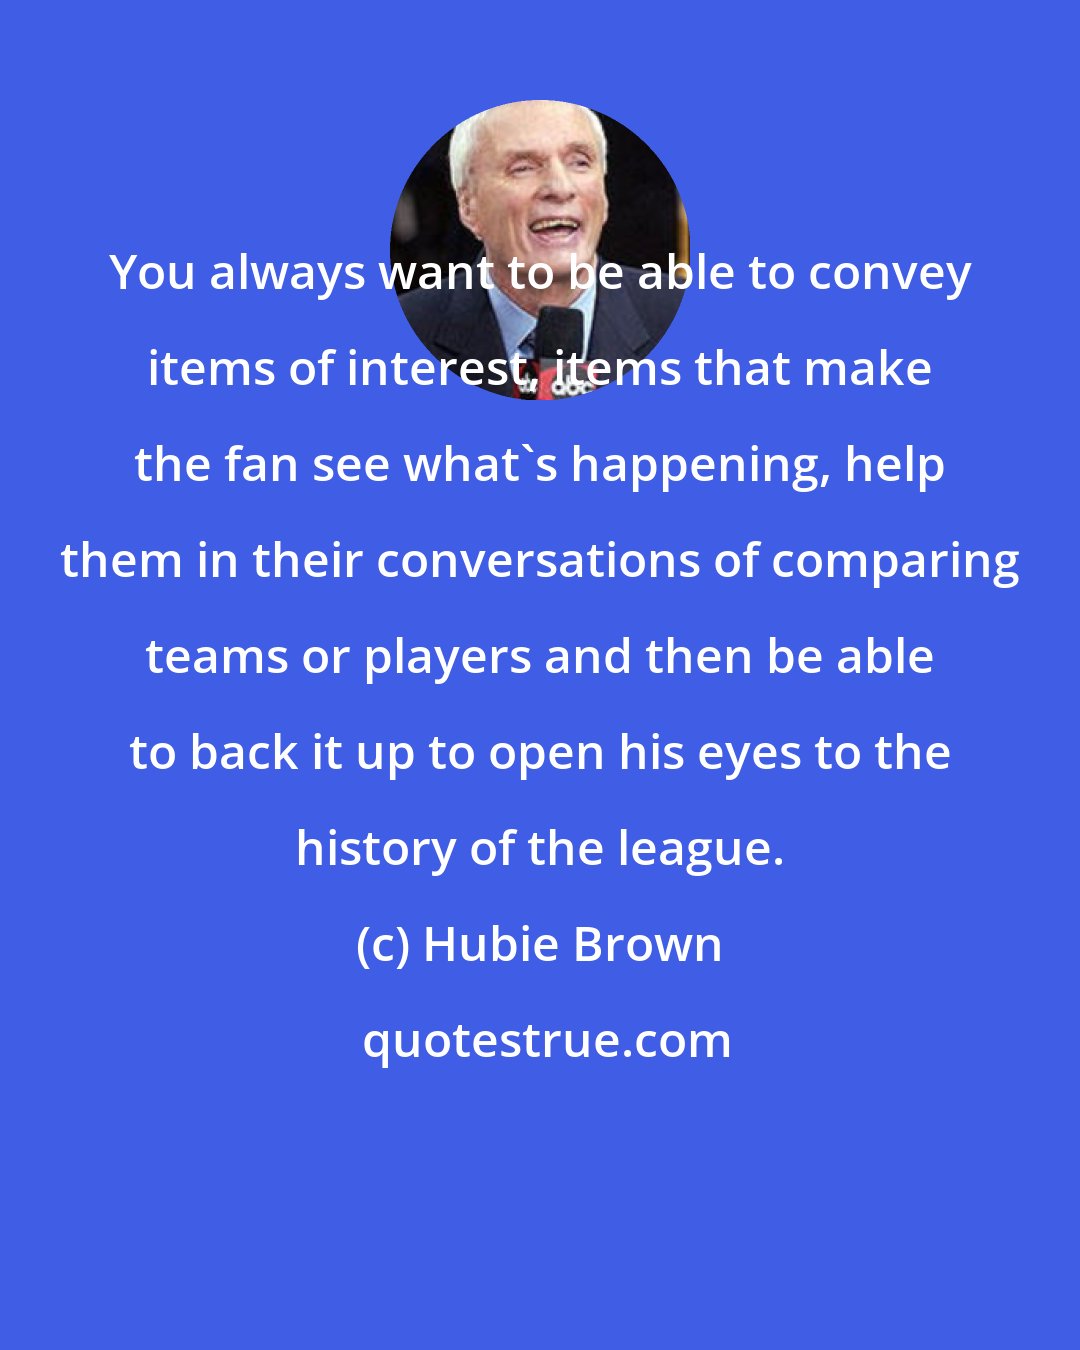 Hubie Brown: You always want to be able to convey items of interest, items that make the fan see what's happening, help them in their conversations of comparing teams or players and then be able to back it up to open his eyes to the history of the league.